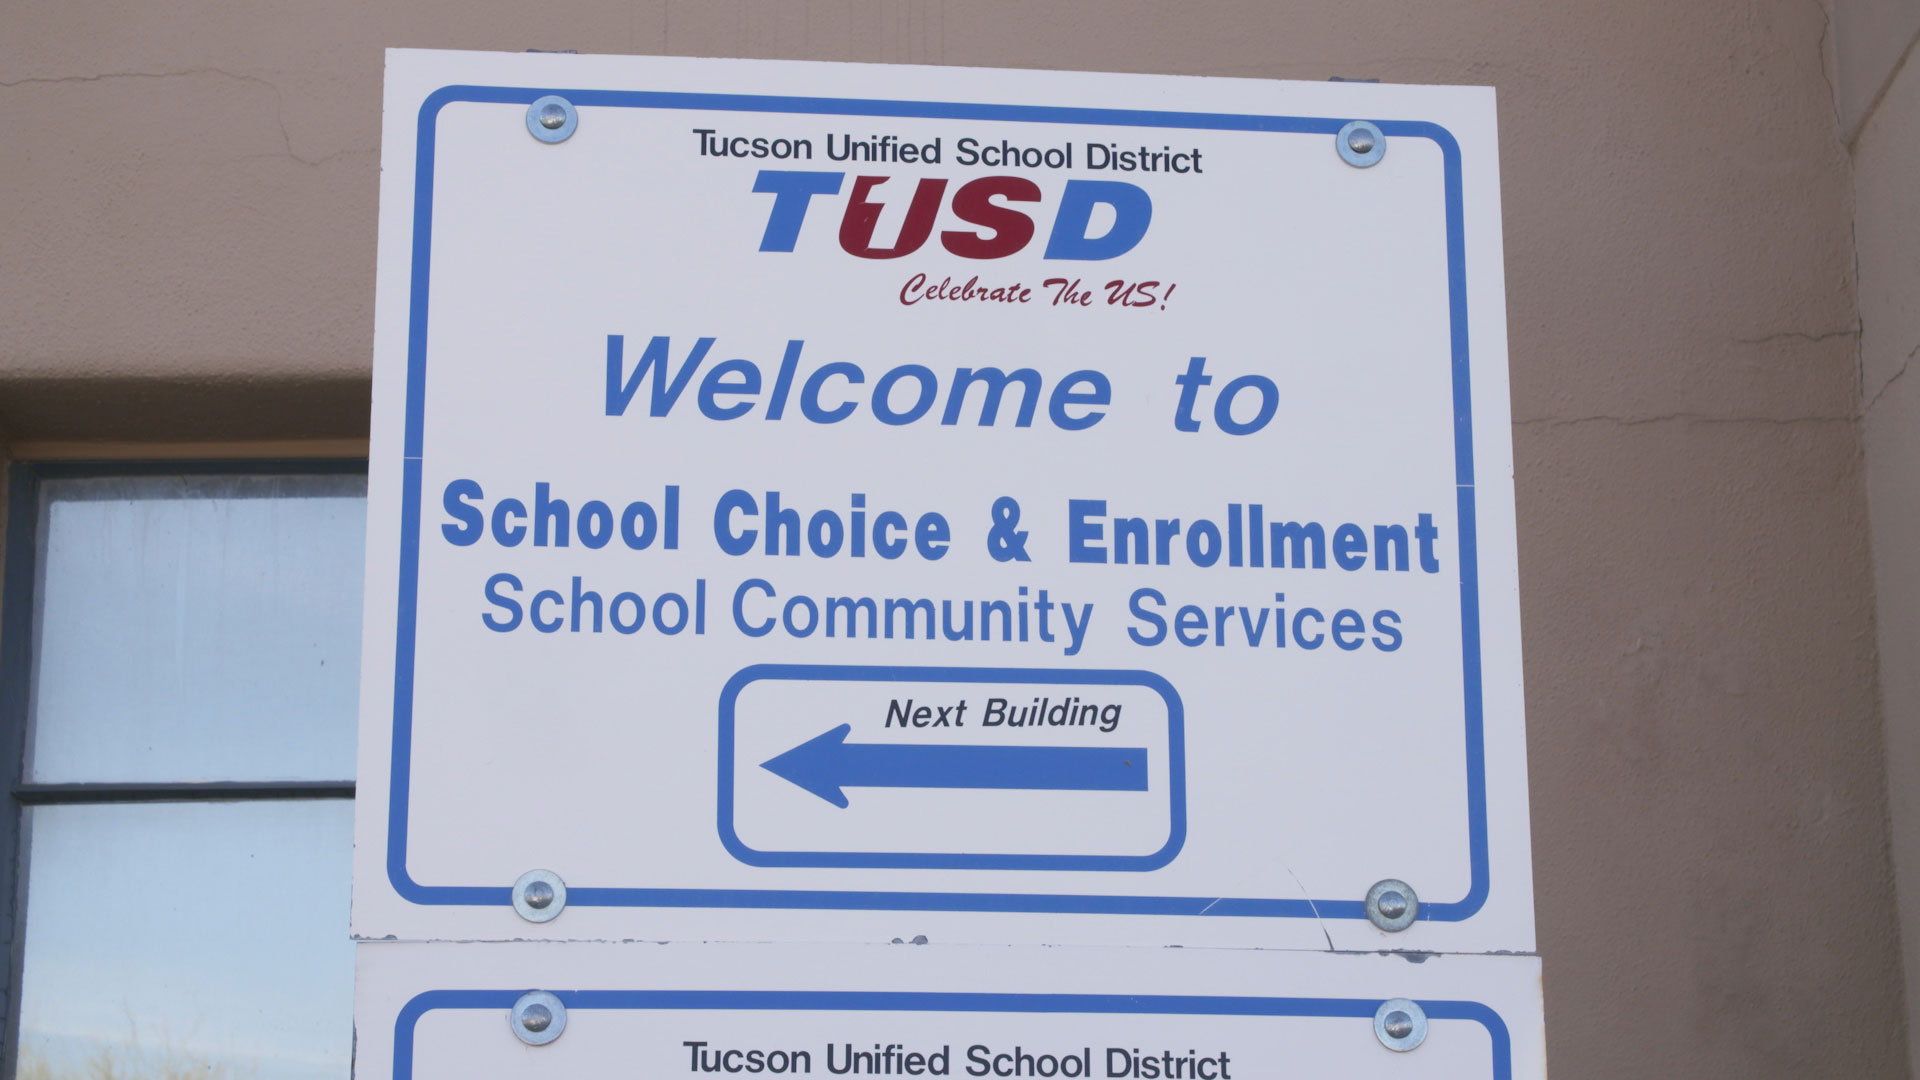 A welcome sign outside the Tucson Unified School District building.